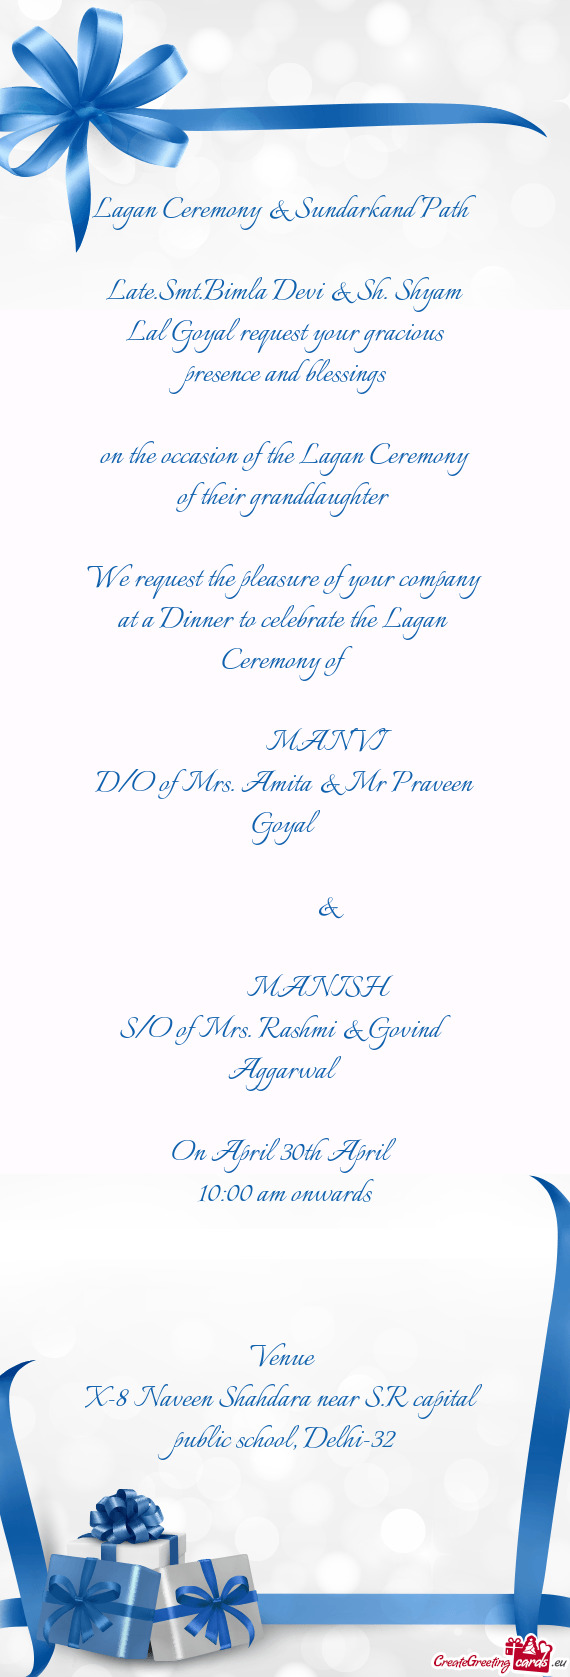 Late.Smt.Bimla Devi & Sh. Shyam Lal Goyal request your gracious presence and blessings